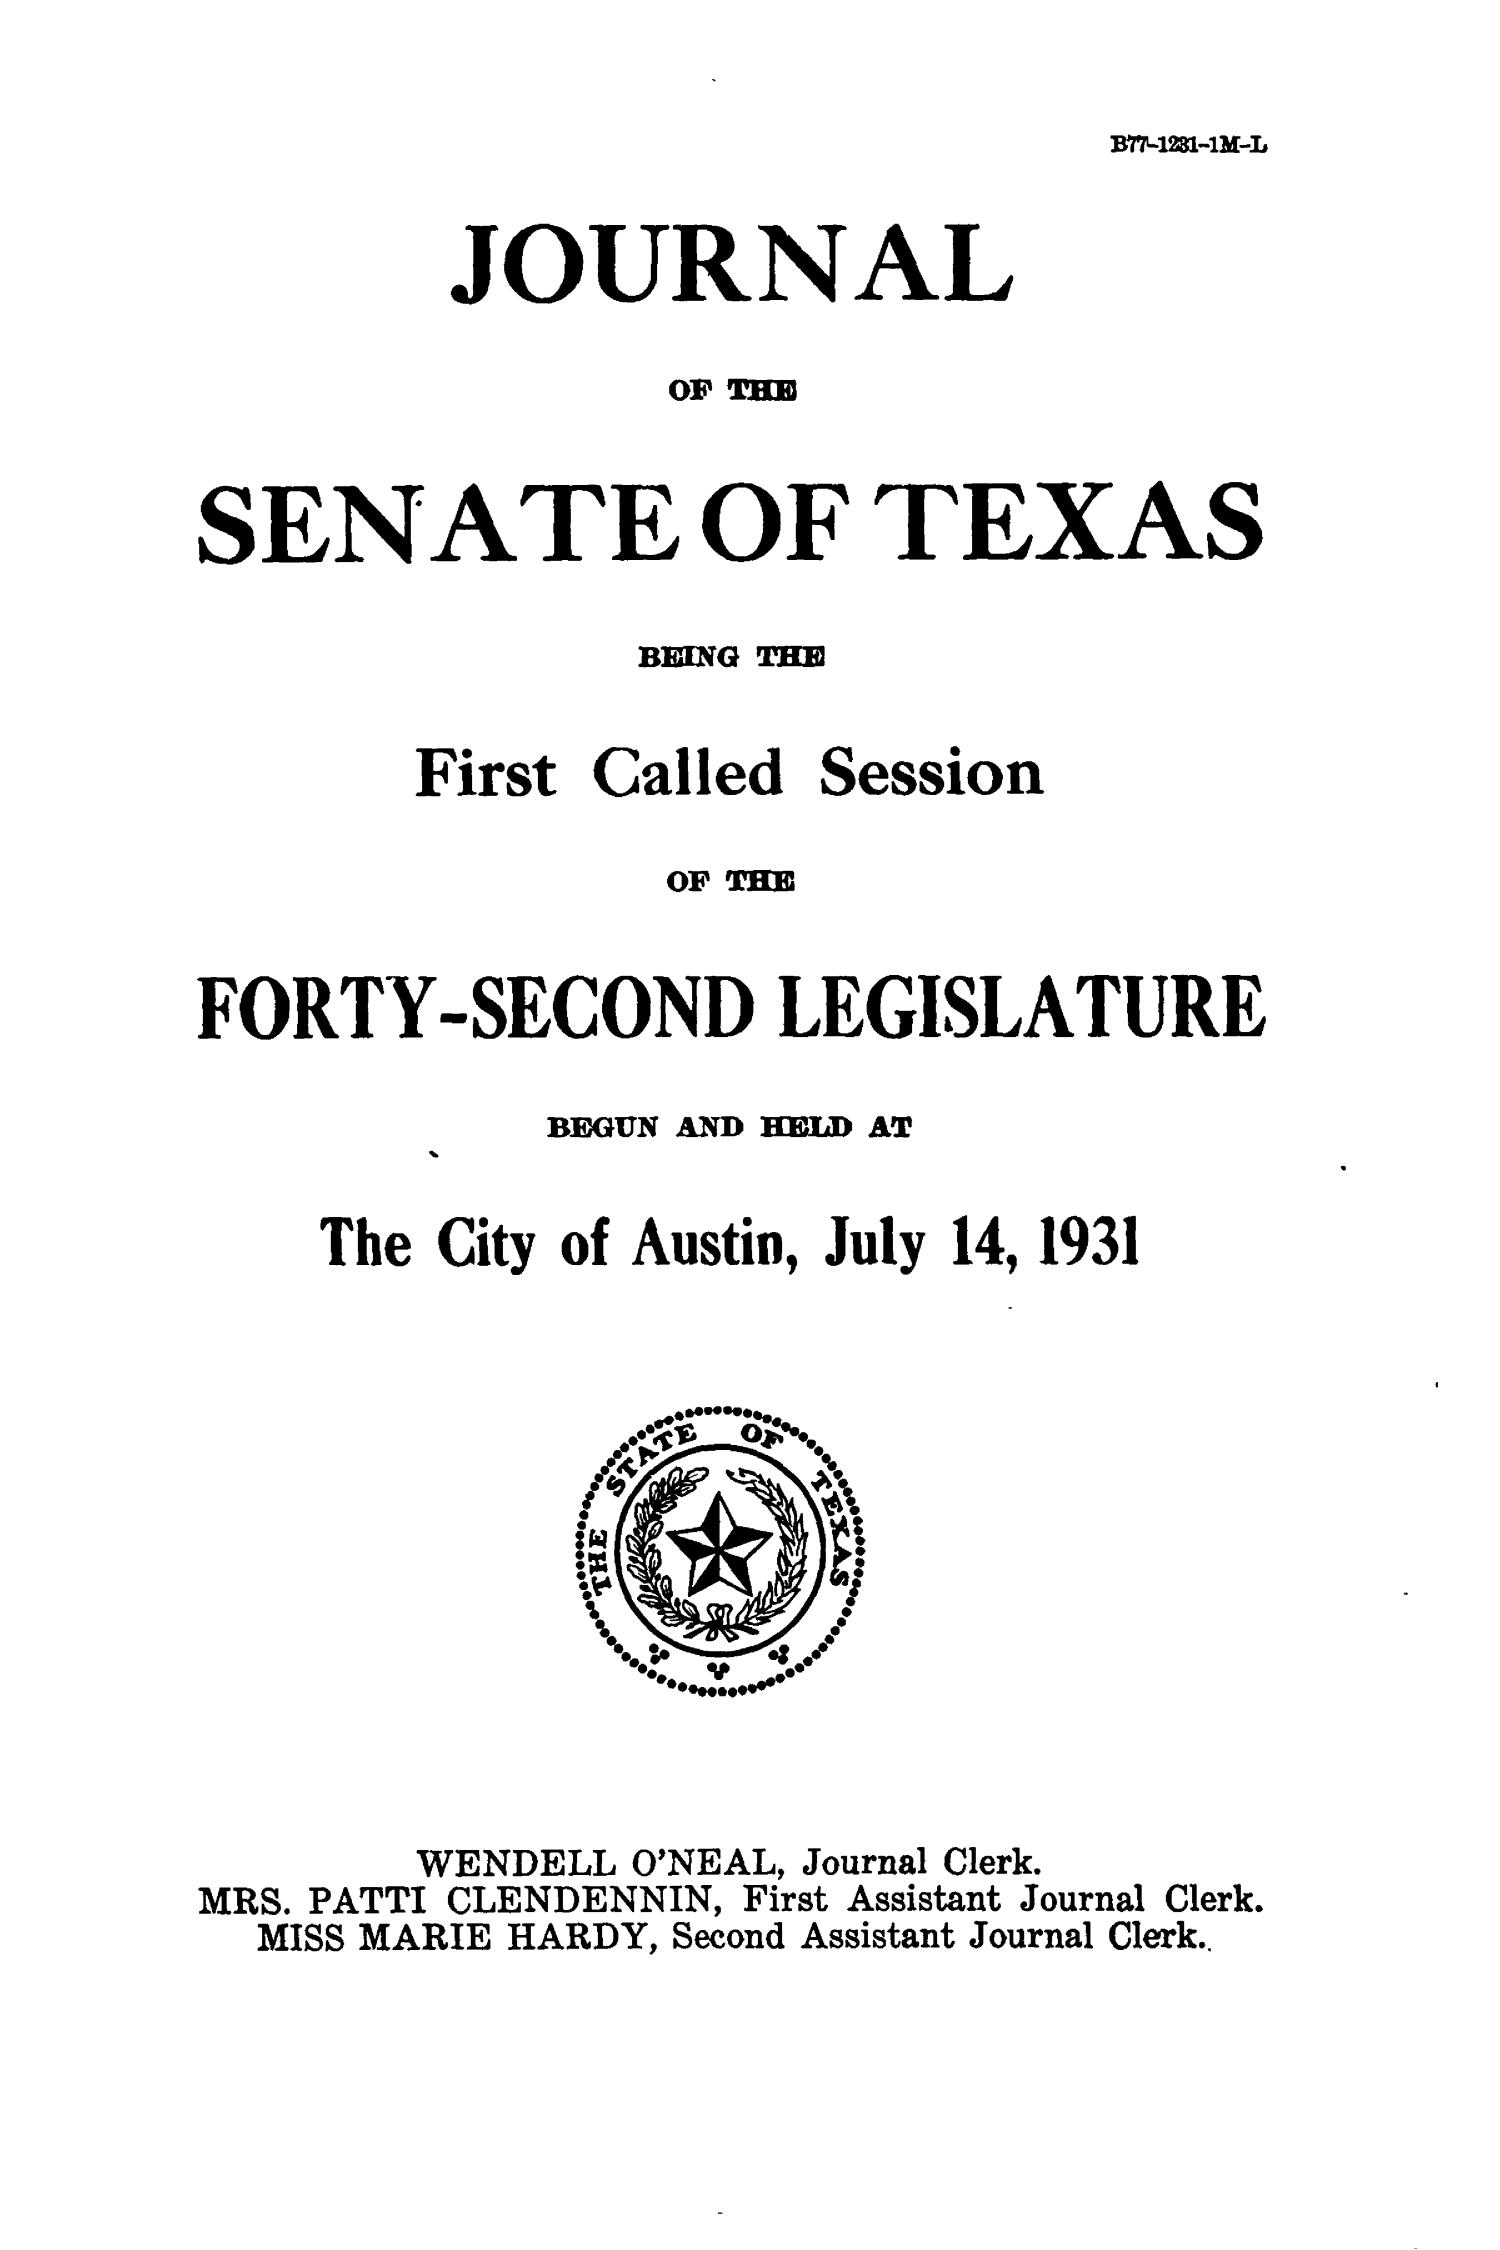 Journal of the Senate of Texas being the First Called Session of the Forty-Second Legislature
                                                
                                                    Title Page
                                                